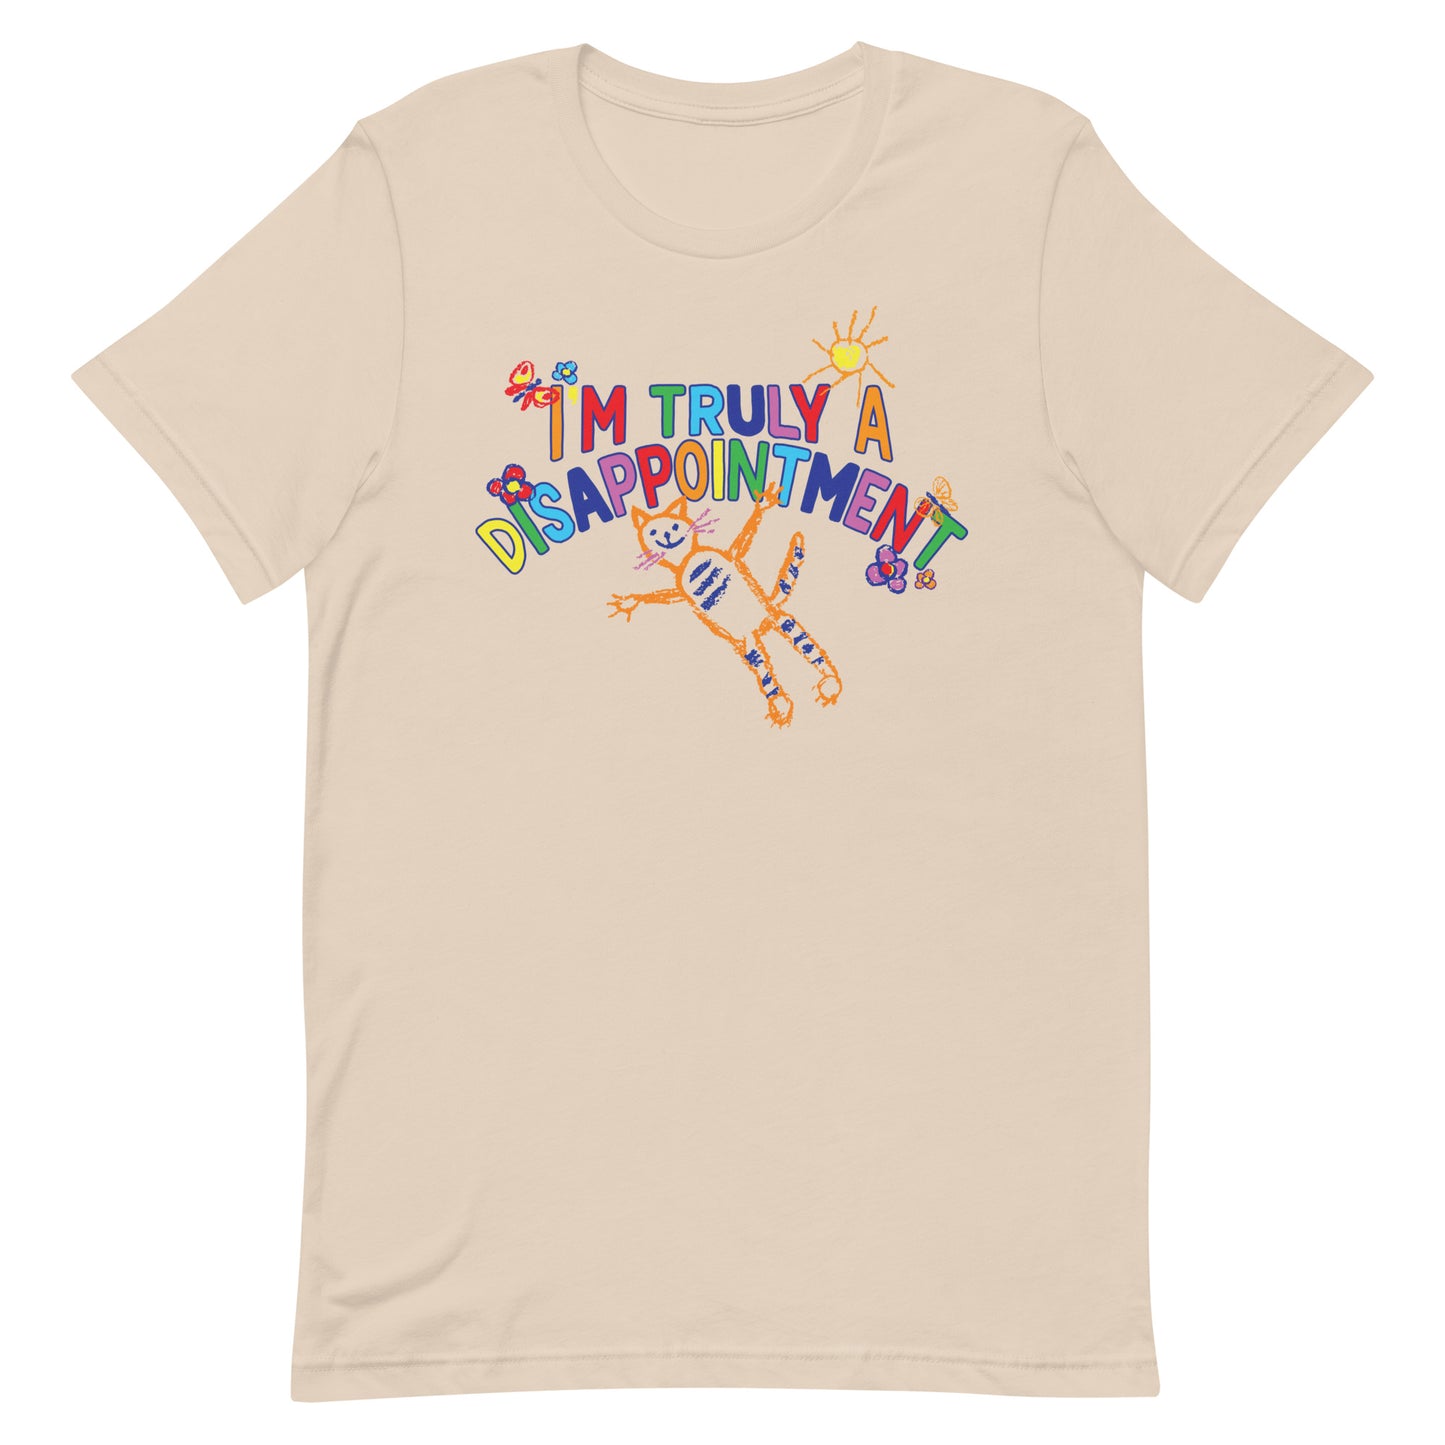 I'm Truly a Disappointment Unisex t-shirt